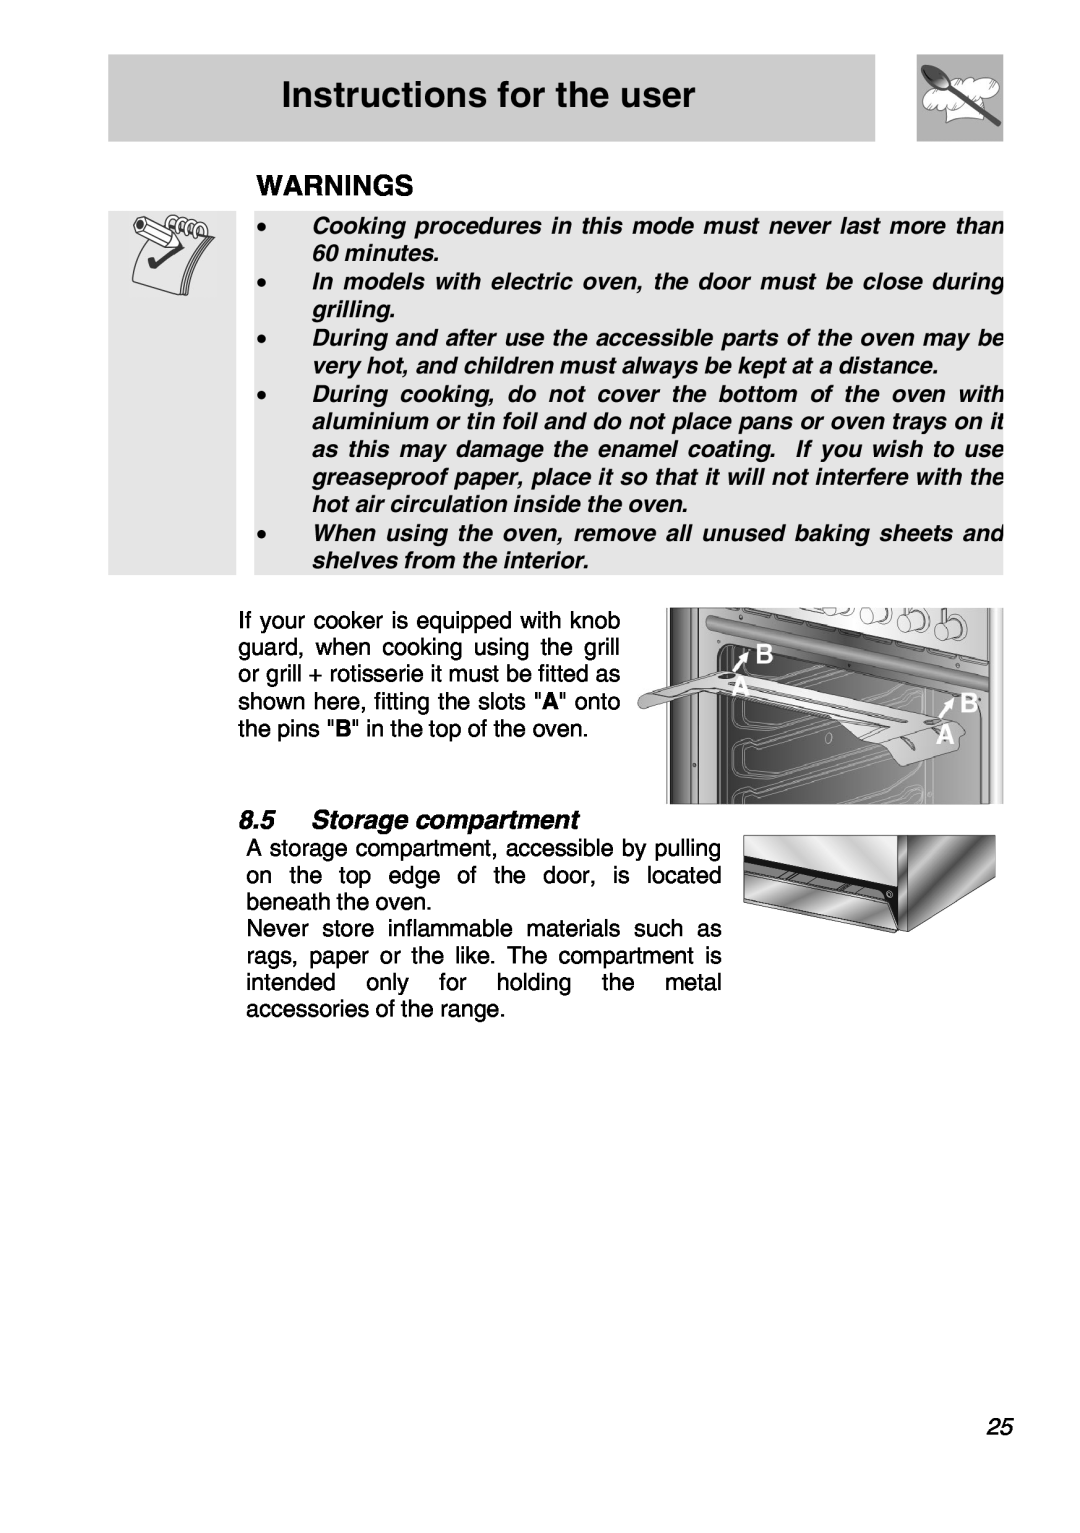 Smeg FS61XPZ5 manual Warnings, Storage compartment, Instructions for the user 